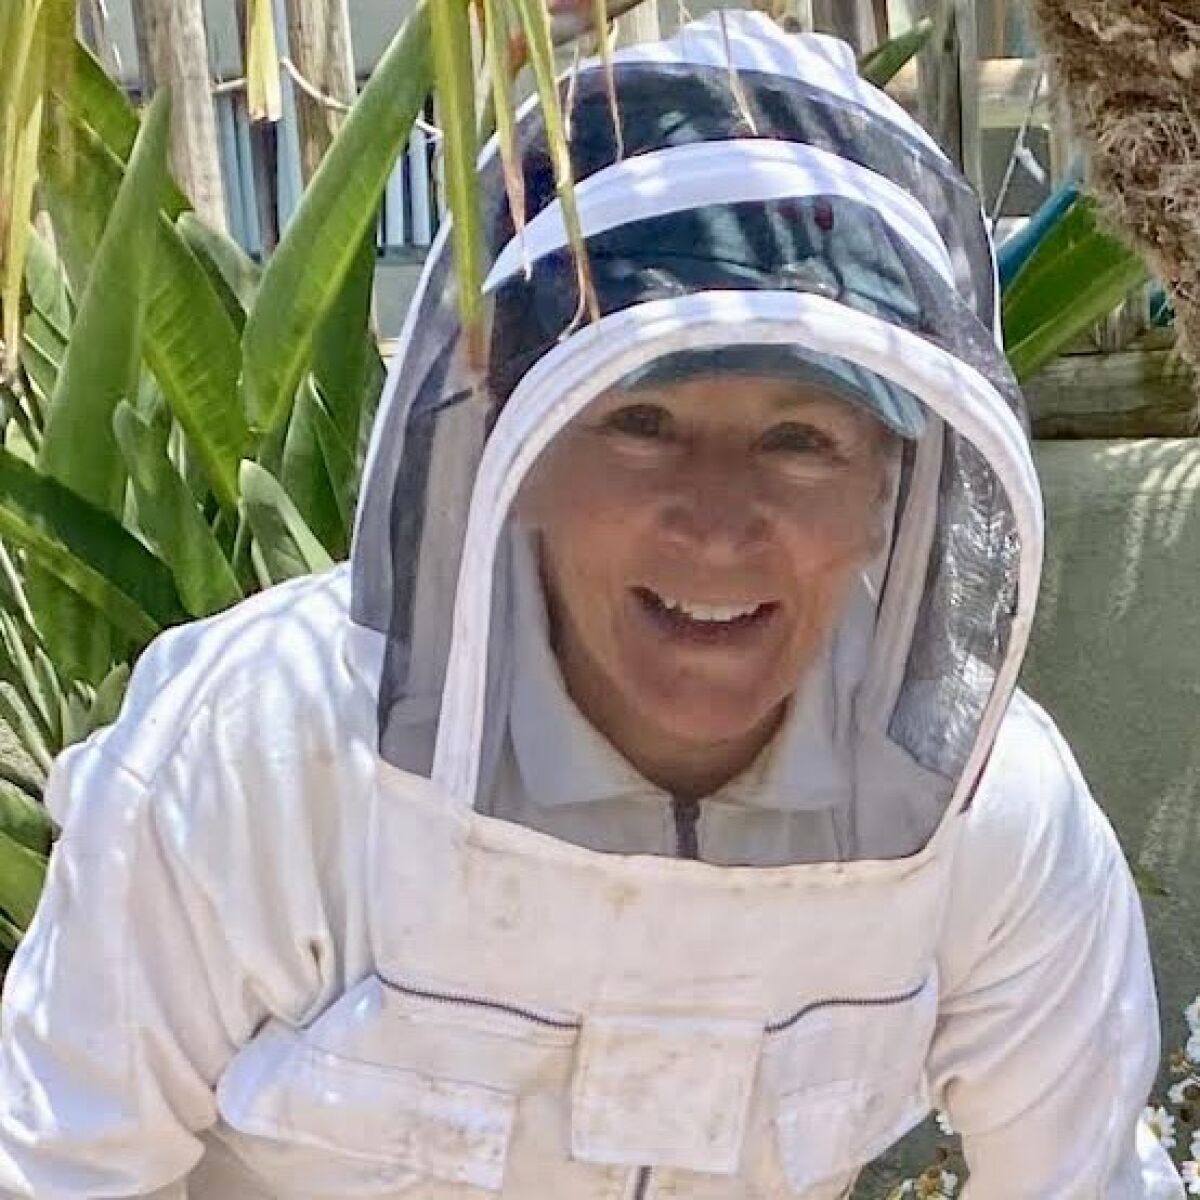 Katie Pelisek will speak about beekeeping on April 21, at 5 p.m. at the La Colonia Community Center in Solana Beach.